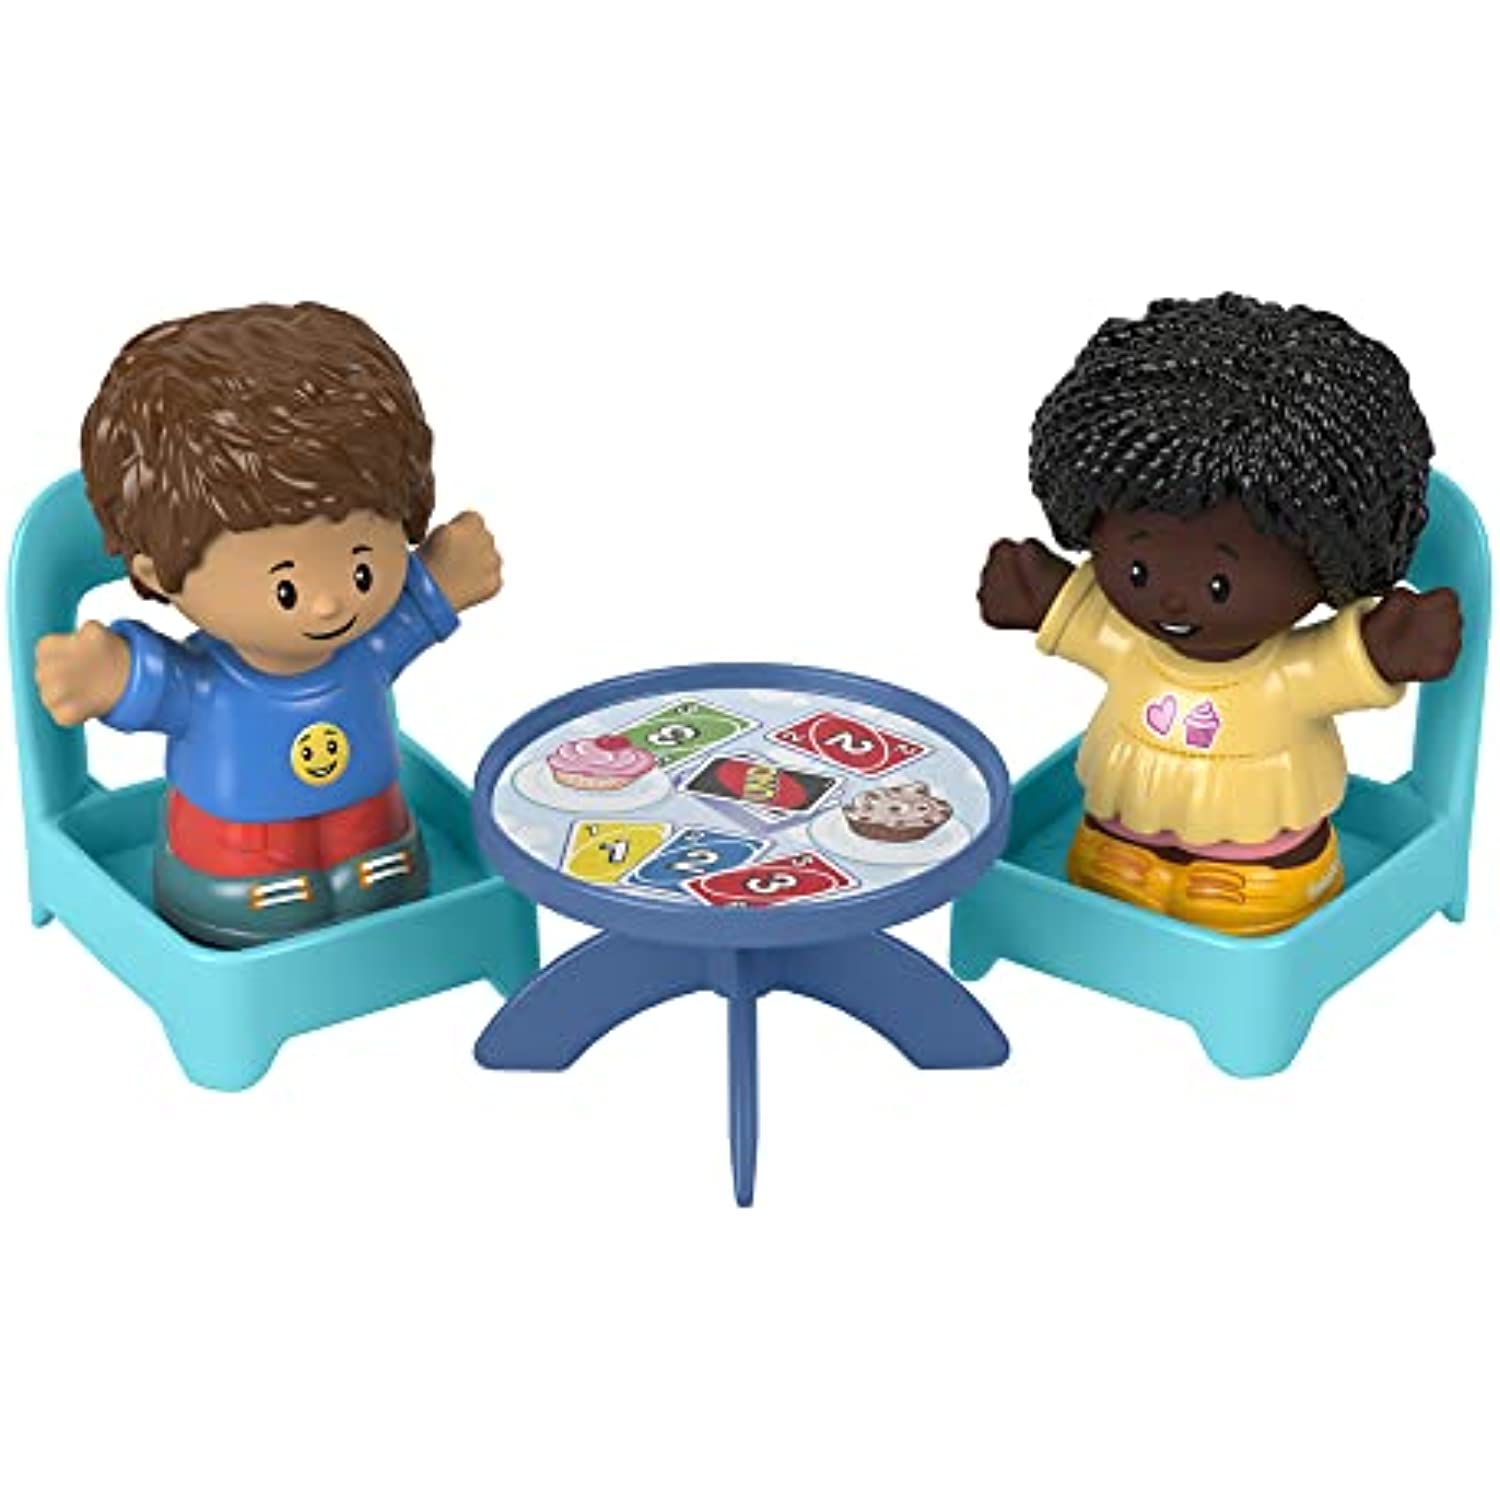 Fisher-Price Little People Card Game Figure Set - HHR45 ~ Includes 2 Little People Figures, 2 Chairs and a Table with Card Game and Cupcake Graphics